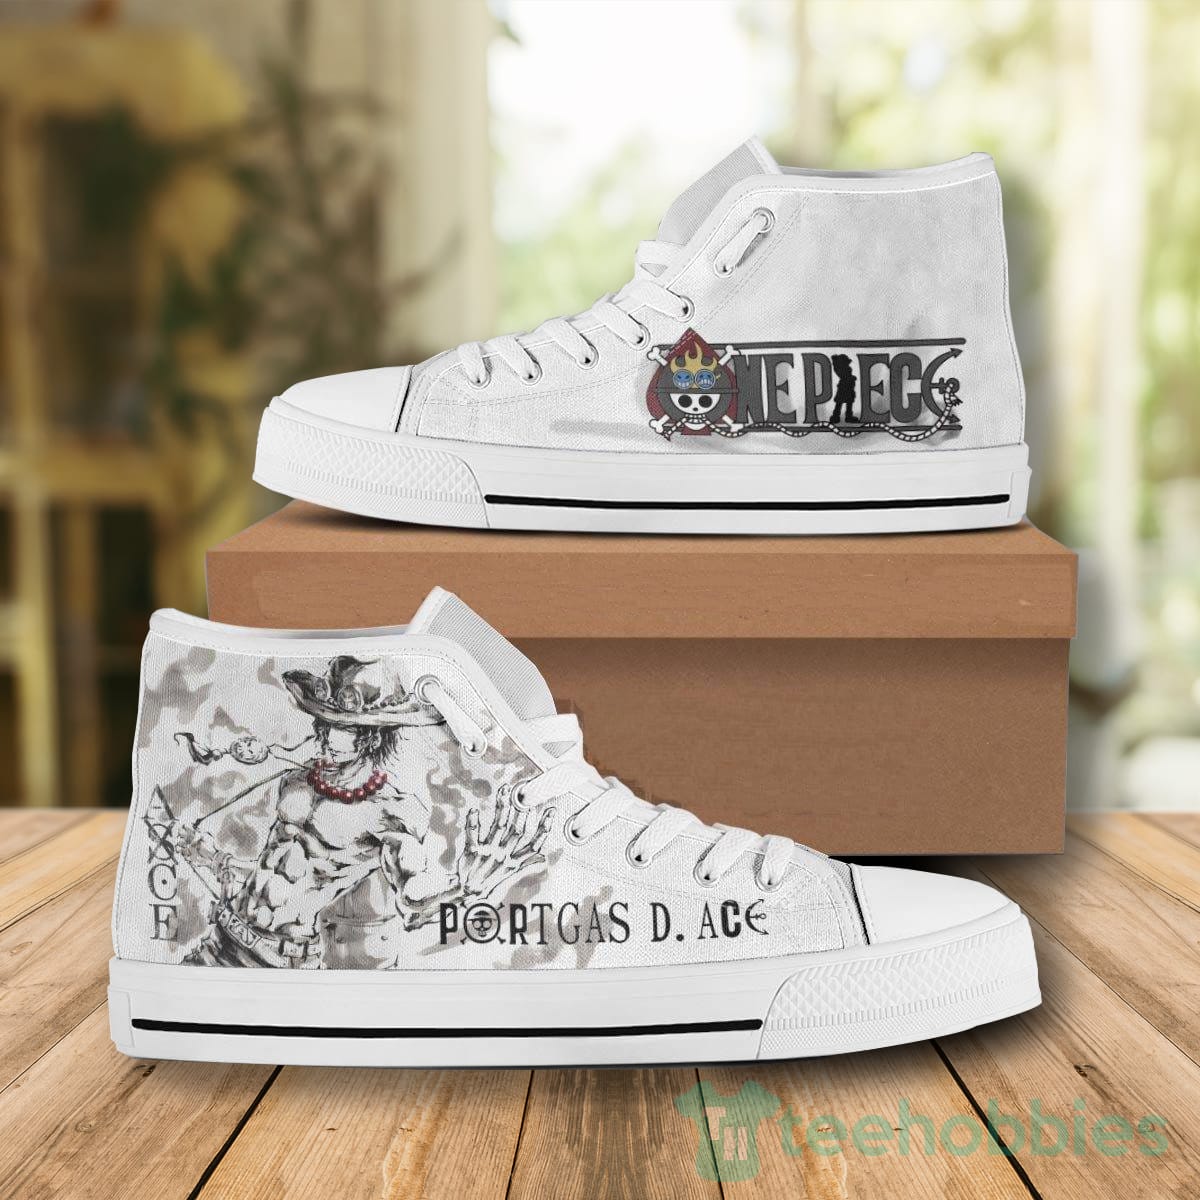 One Piece Ace Anime High Top Canvas Shoes